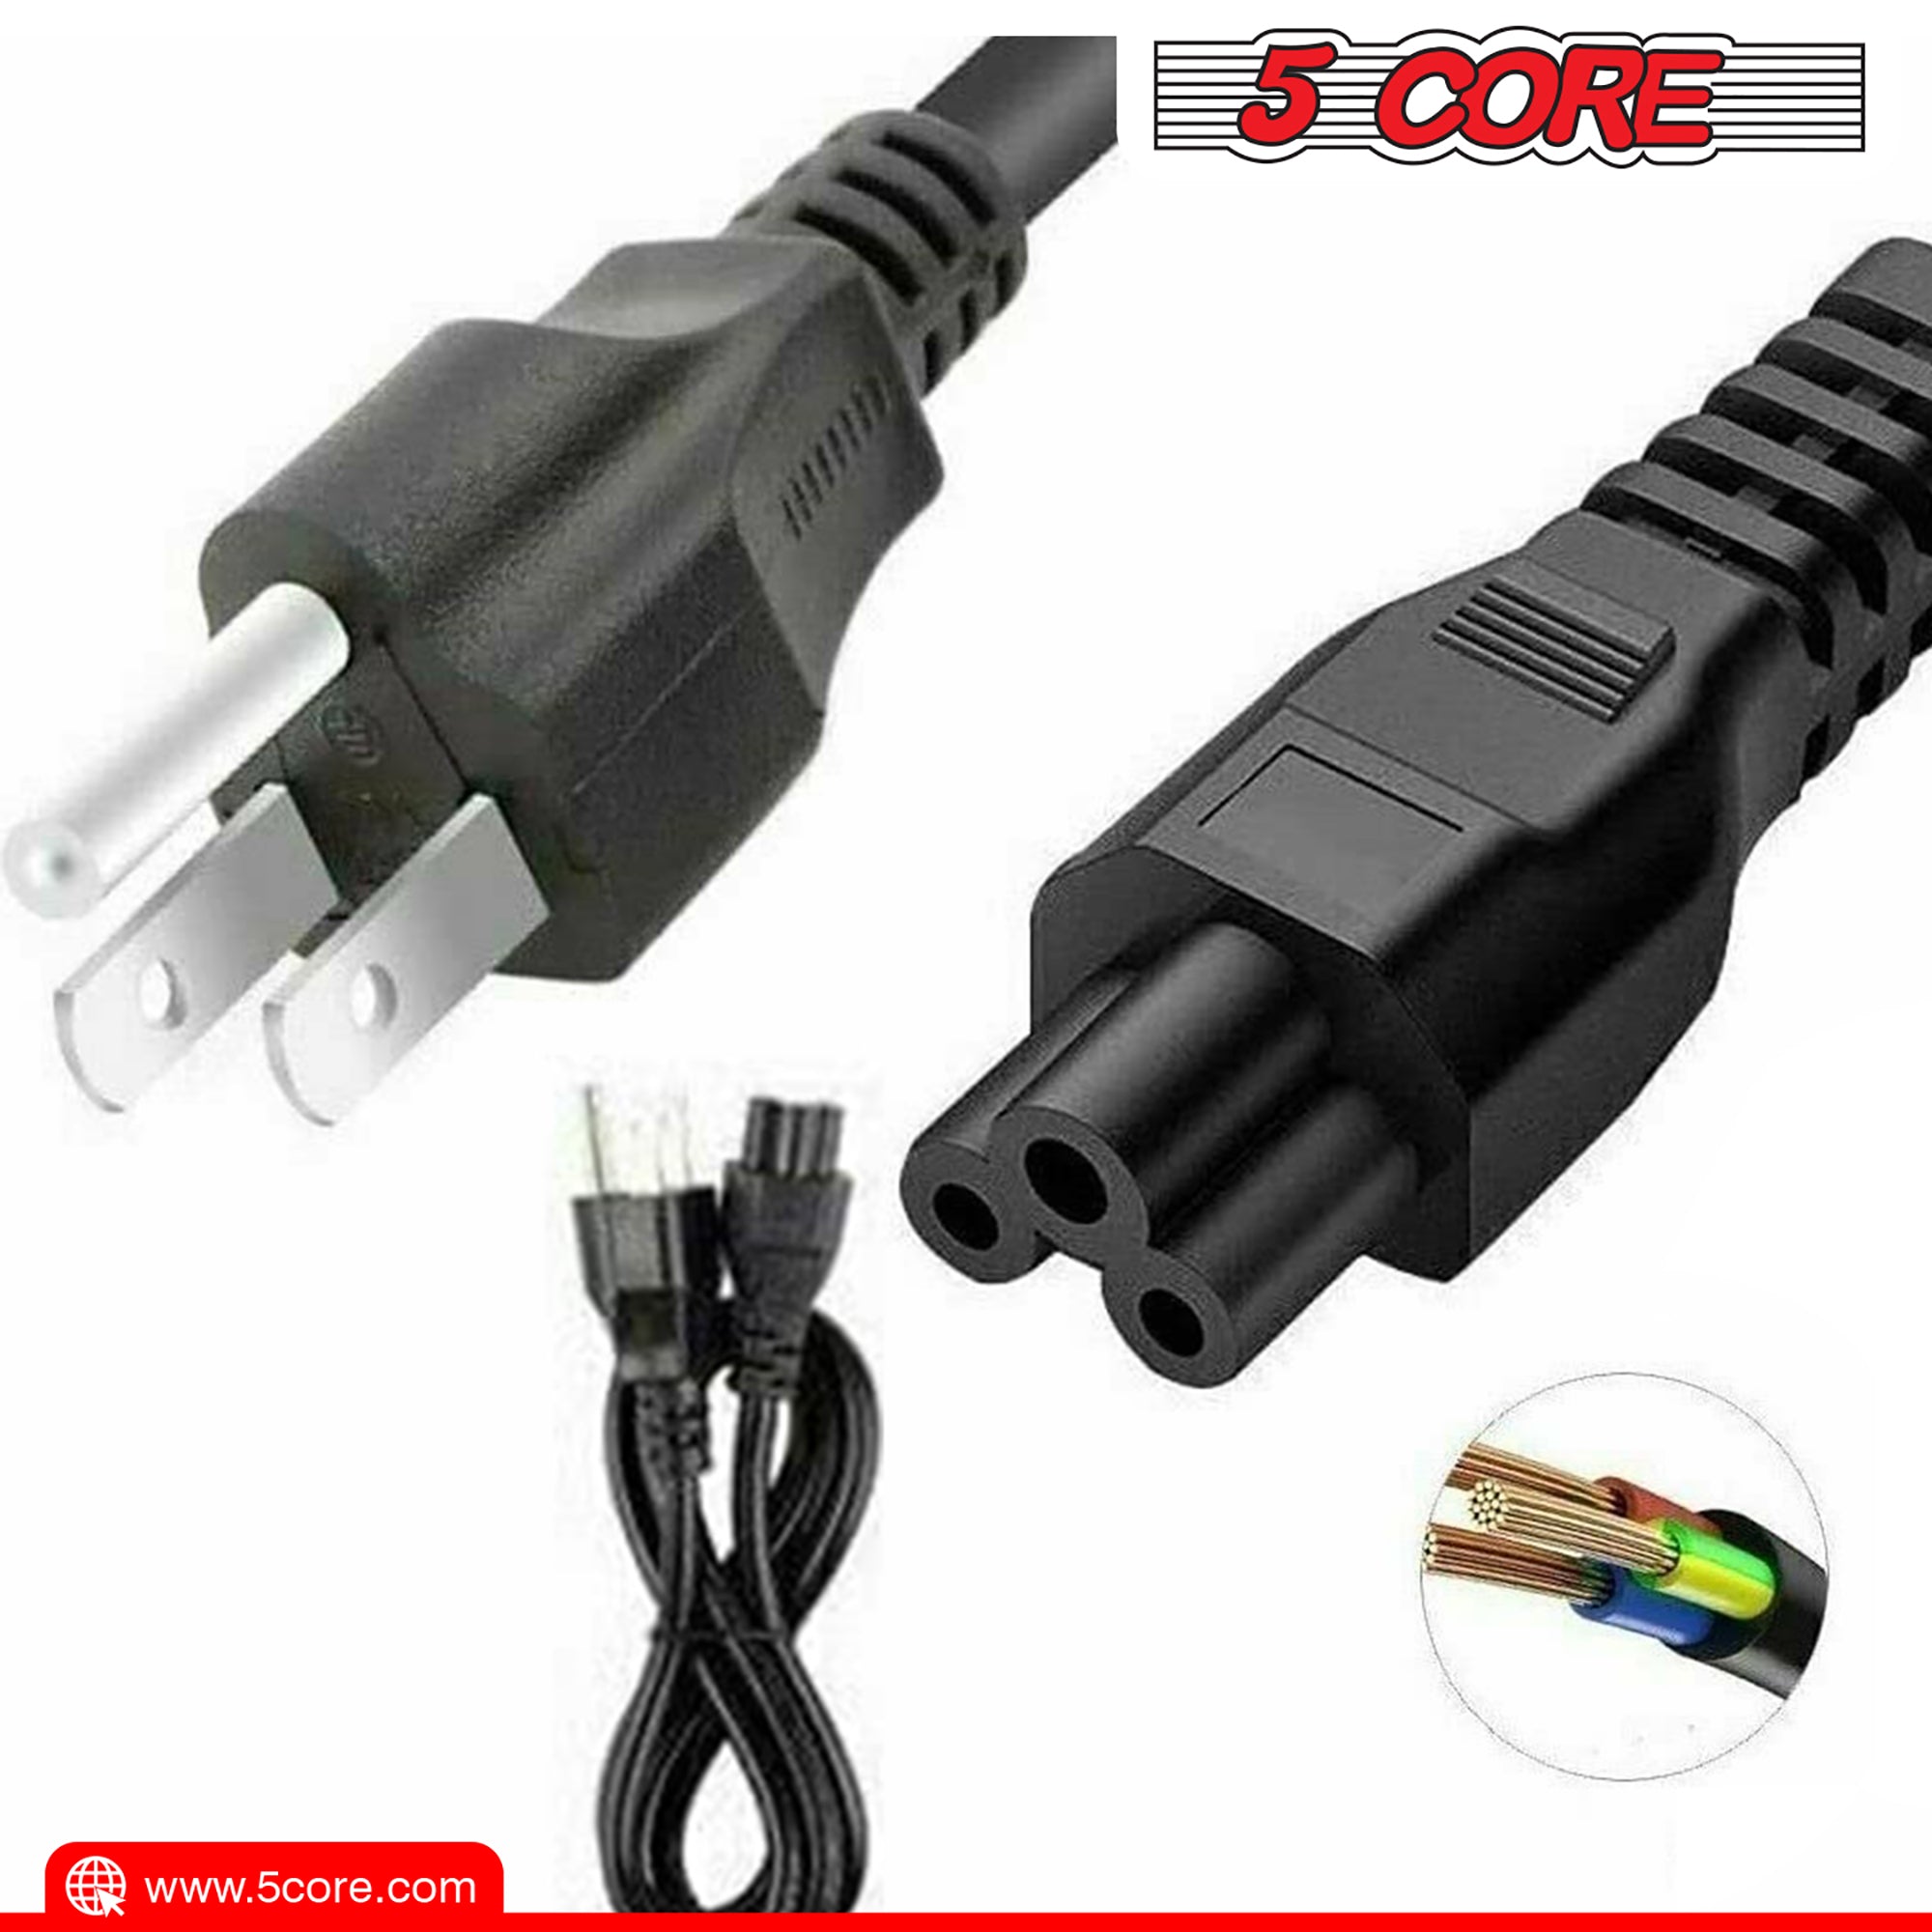 5 Core AC Power Cord 10 Ft • 3 Prong Extension Adapter 16AWG/2C 125V 13A • US Polarized Male- Female